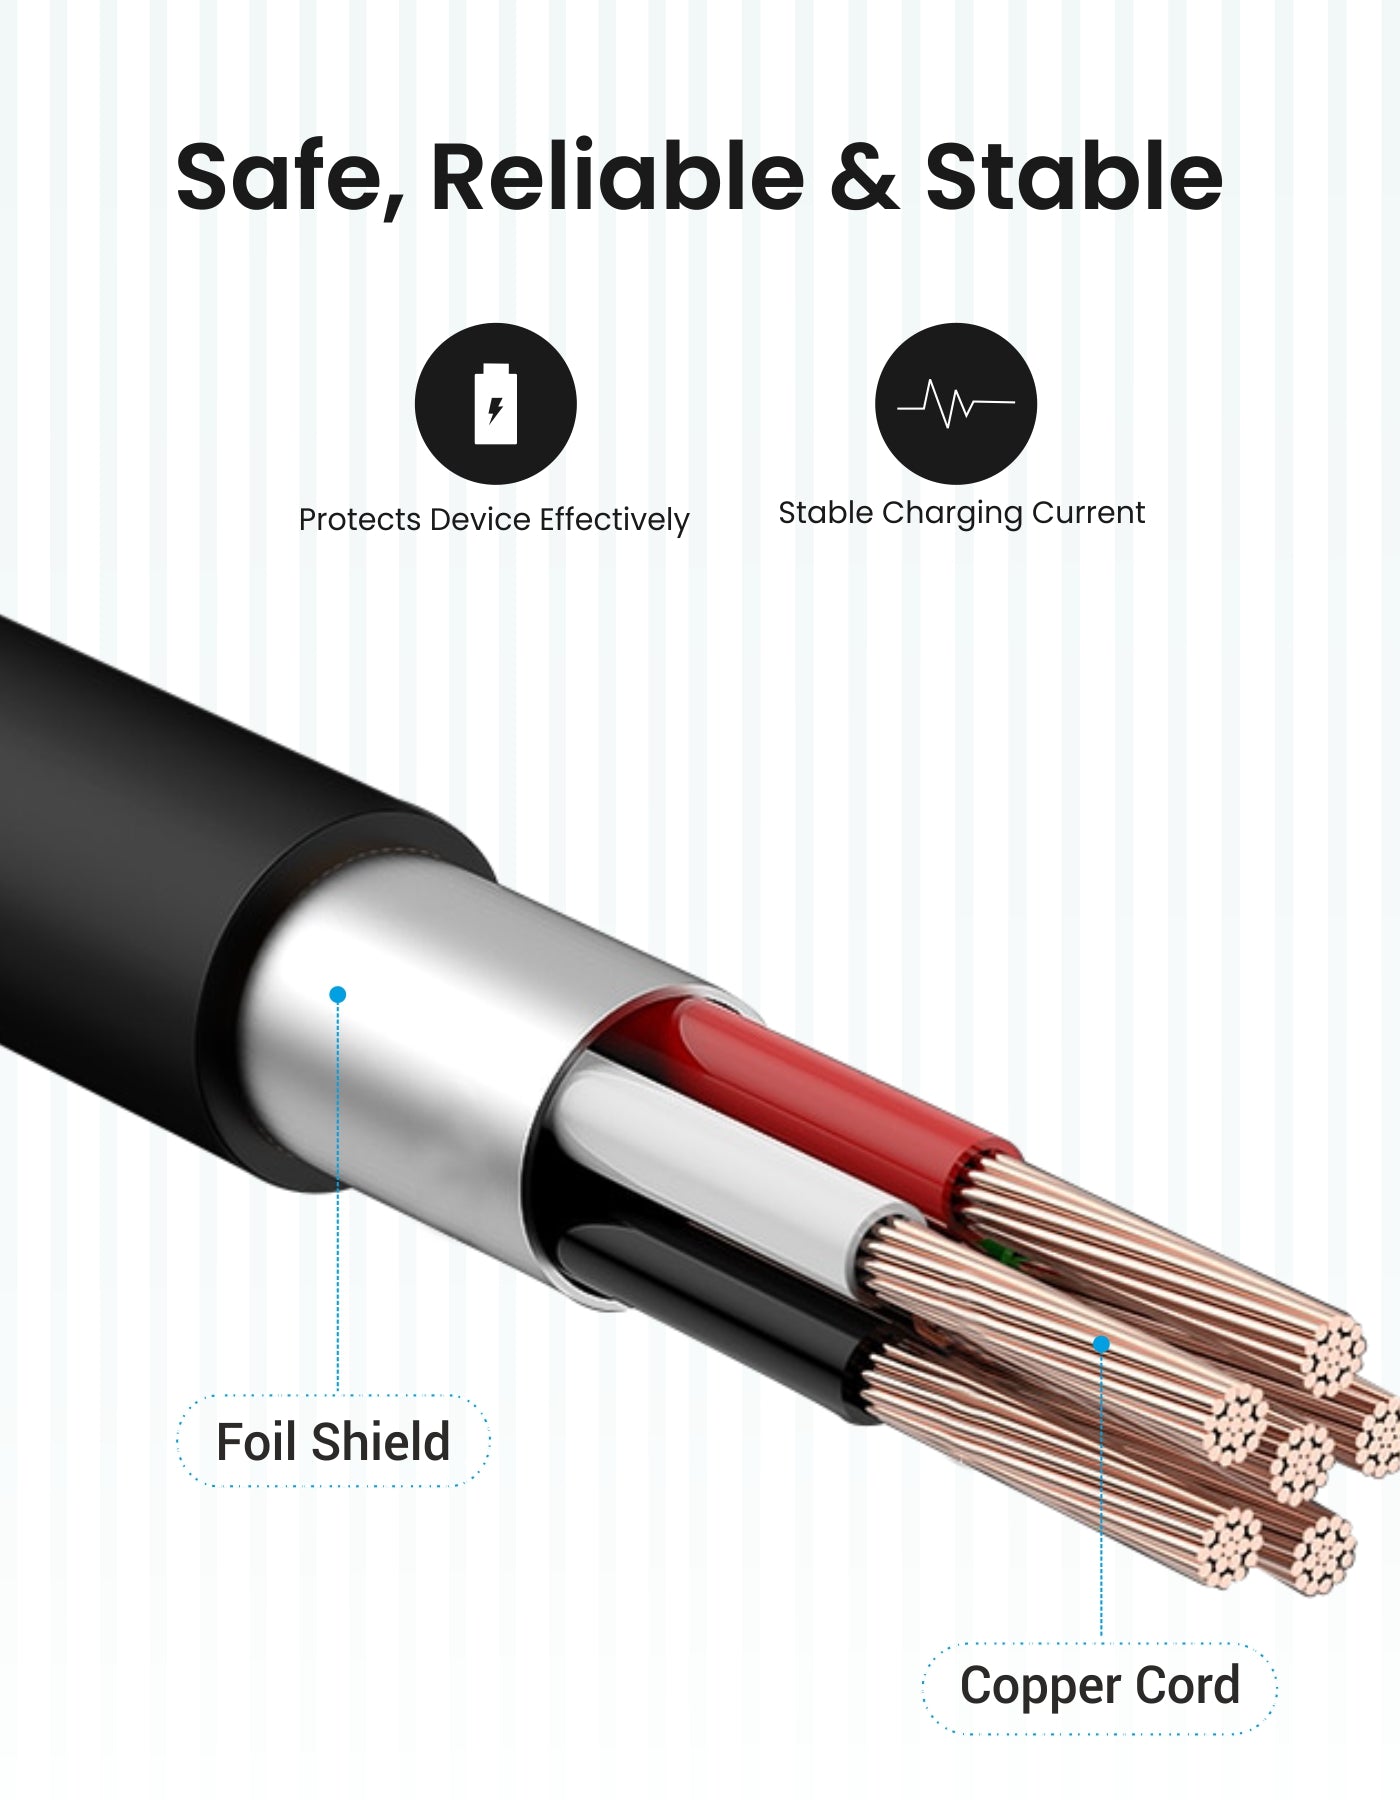 Portronics Konnect Core Type C cable safe and easy to use 